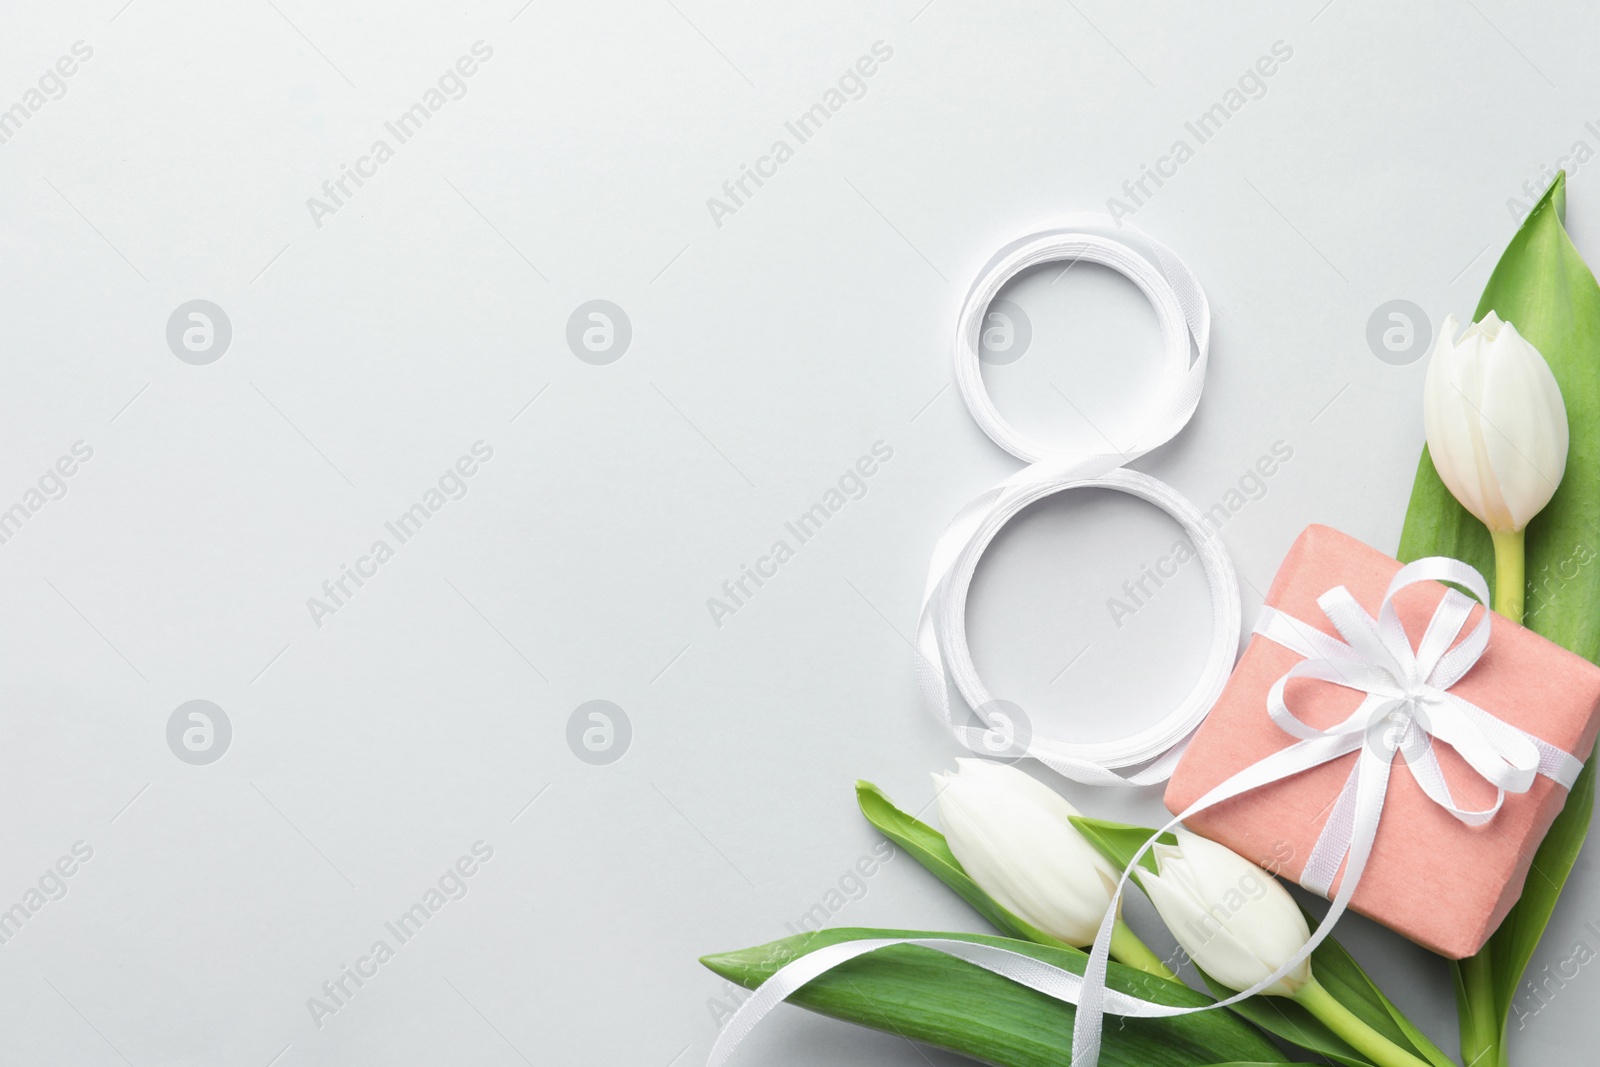 Photo of 8 March card design with tulips, gift and space for text on light grey background, flat lay. International Women's Day